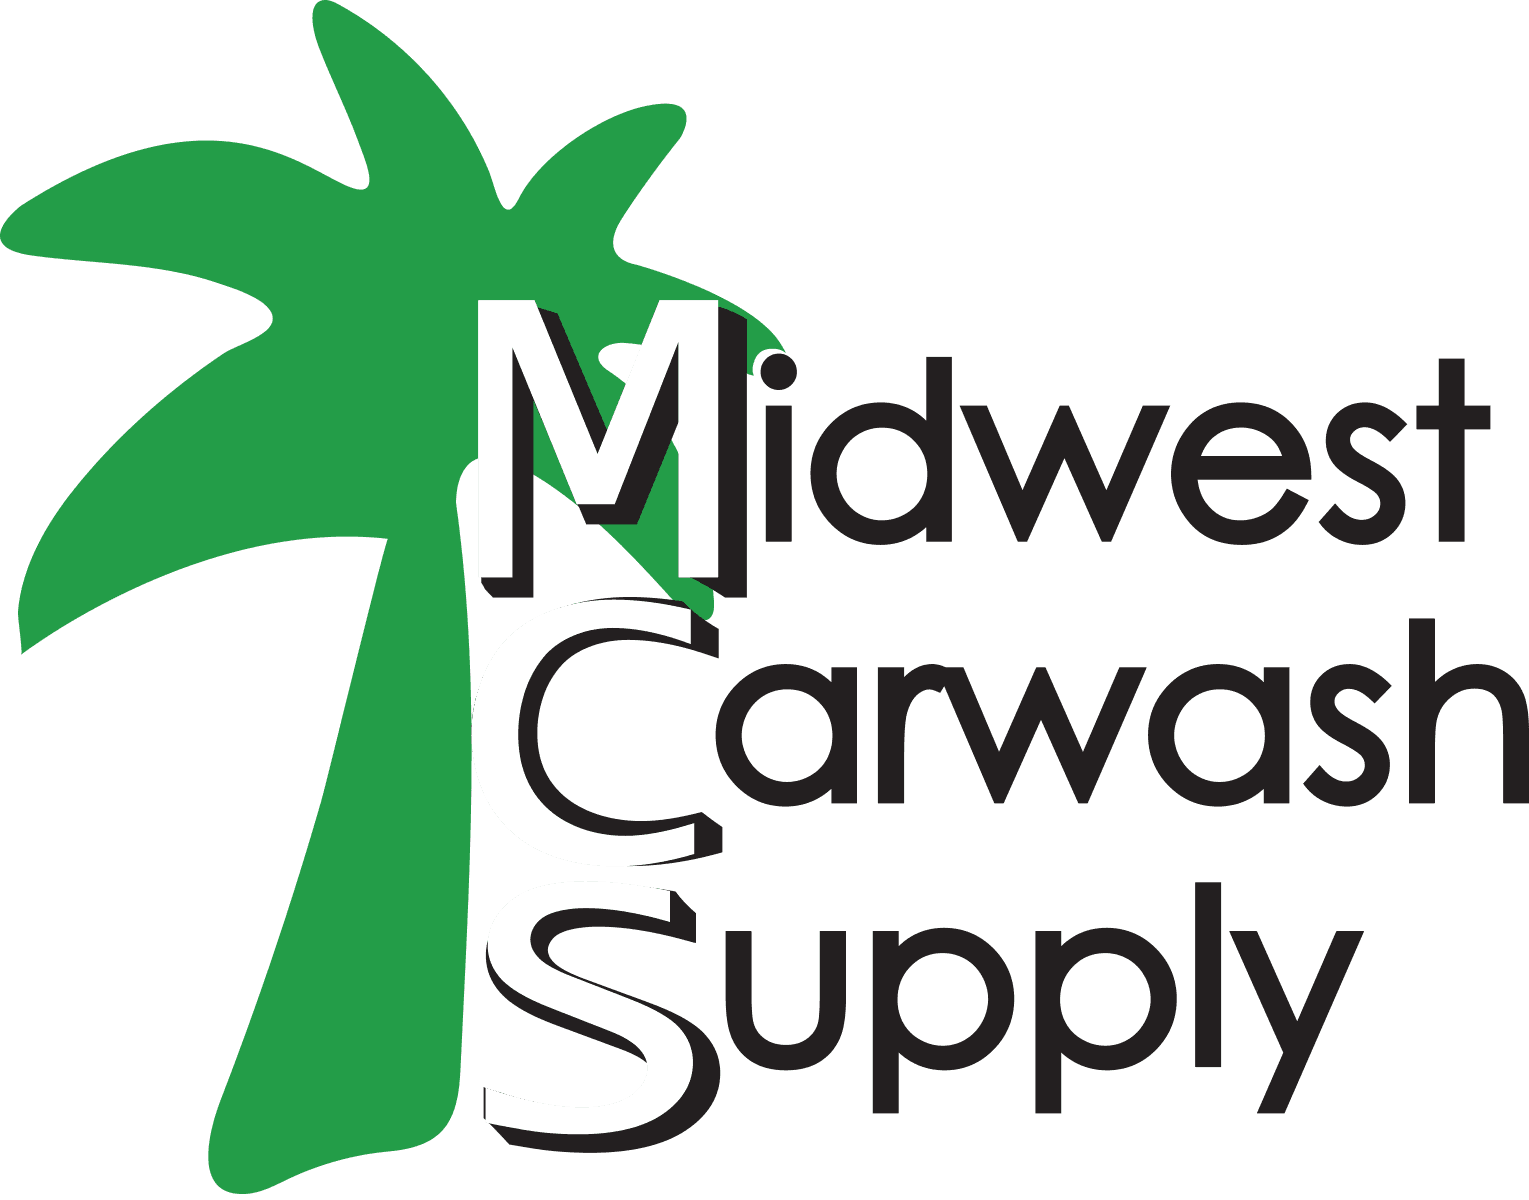 Midwest carwash supply palm tree